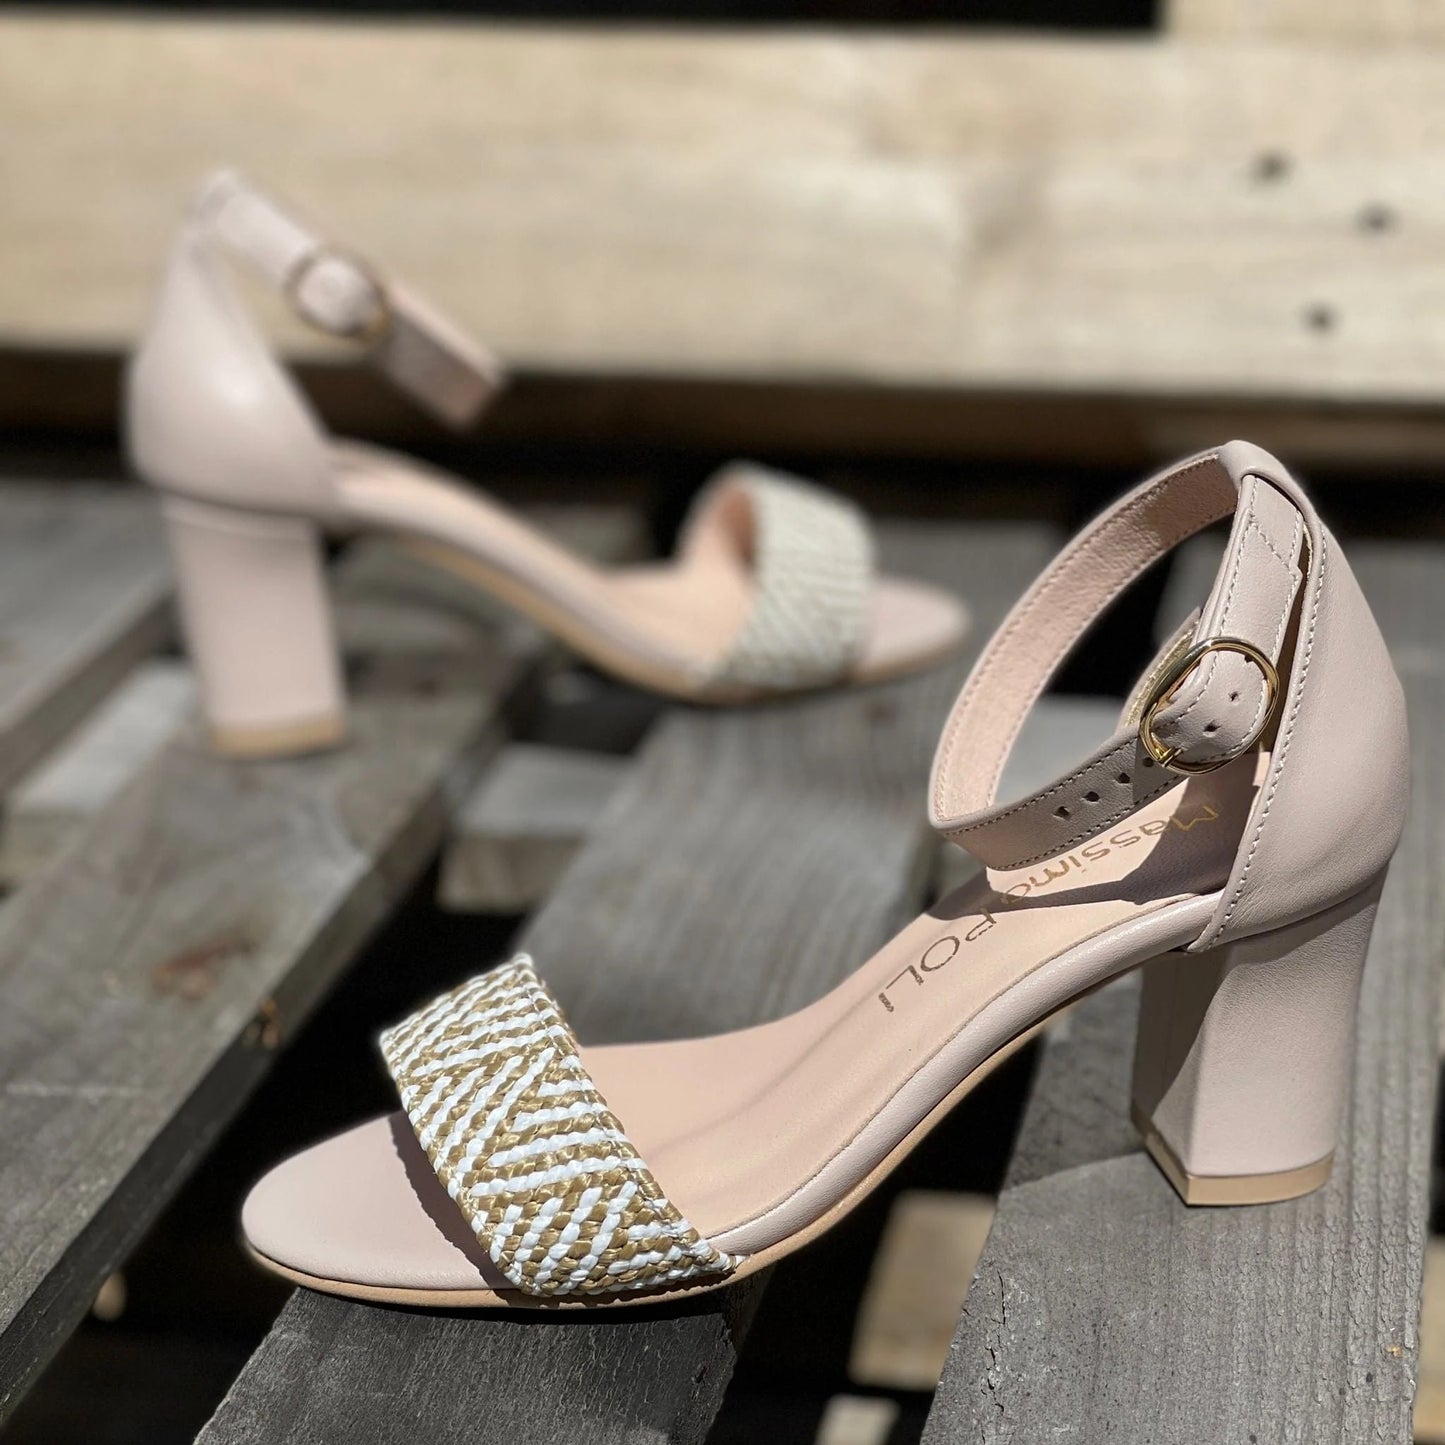 Nude leather petite size strap heels